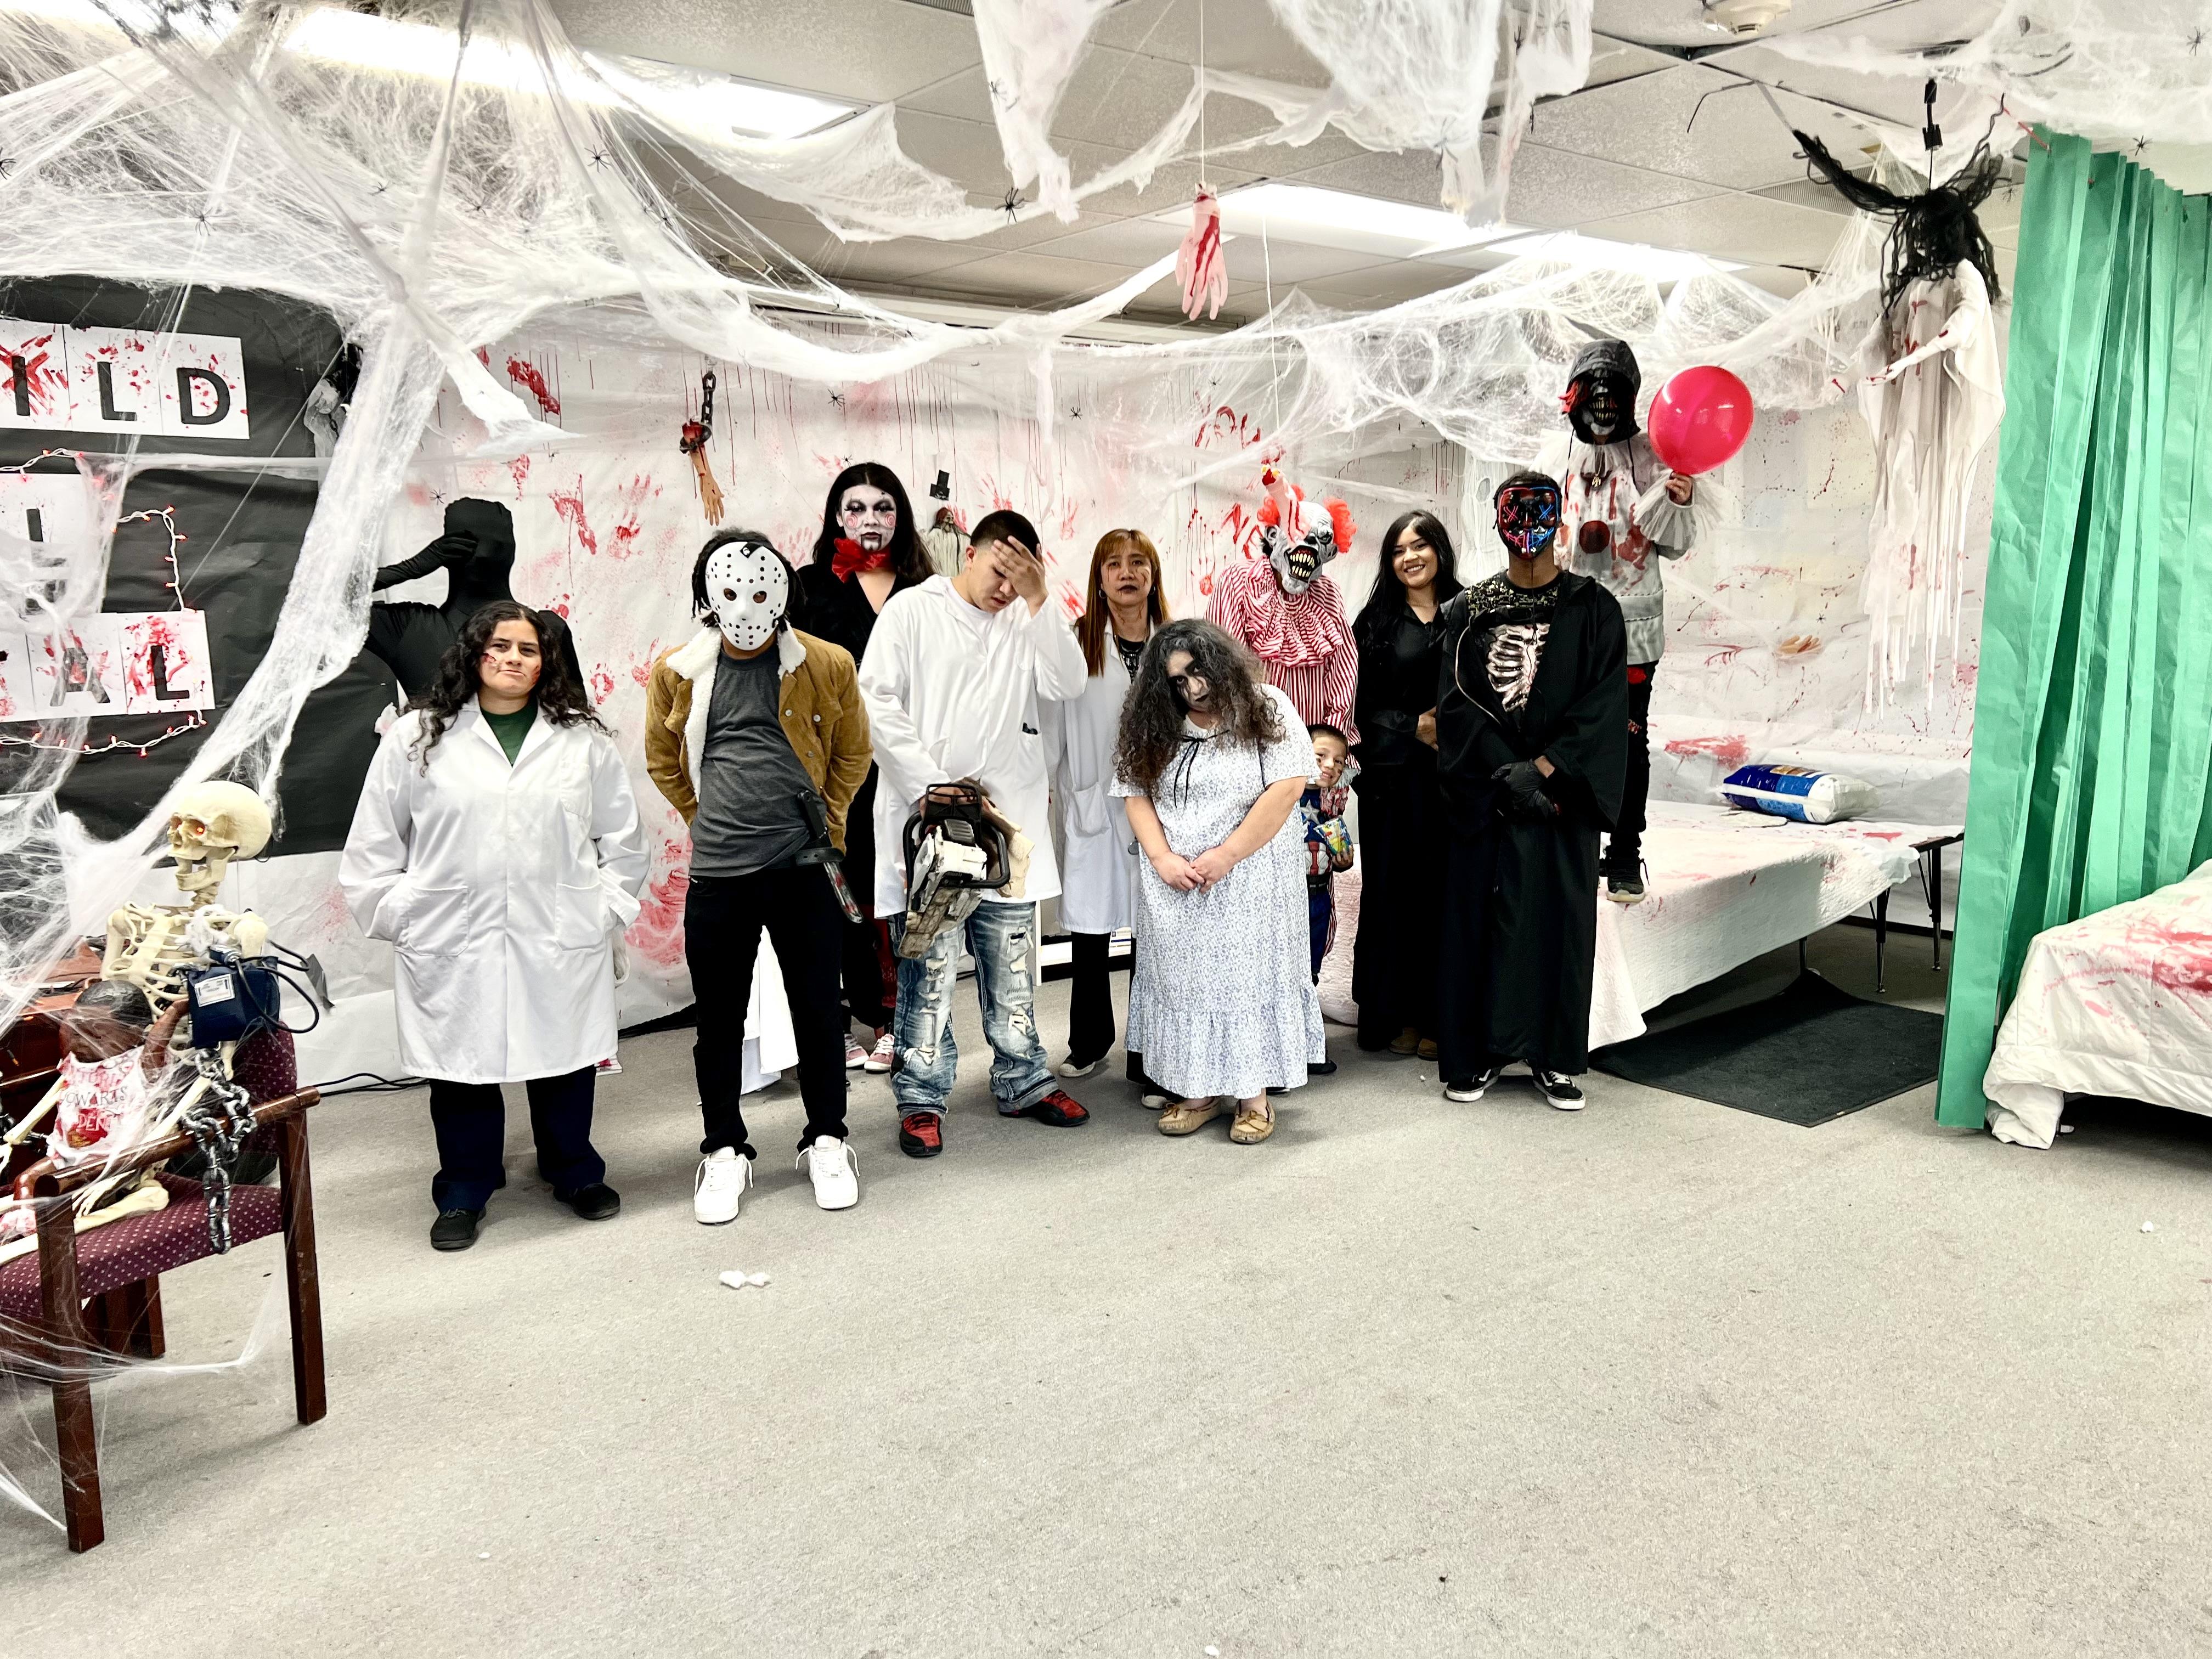 students and staff dressed in scary Halloween costumes